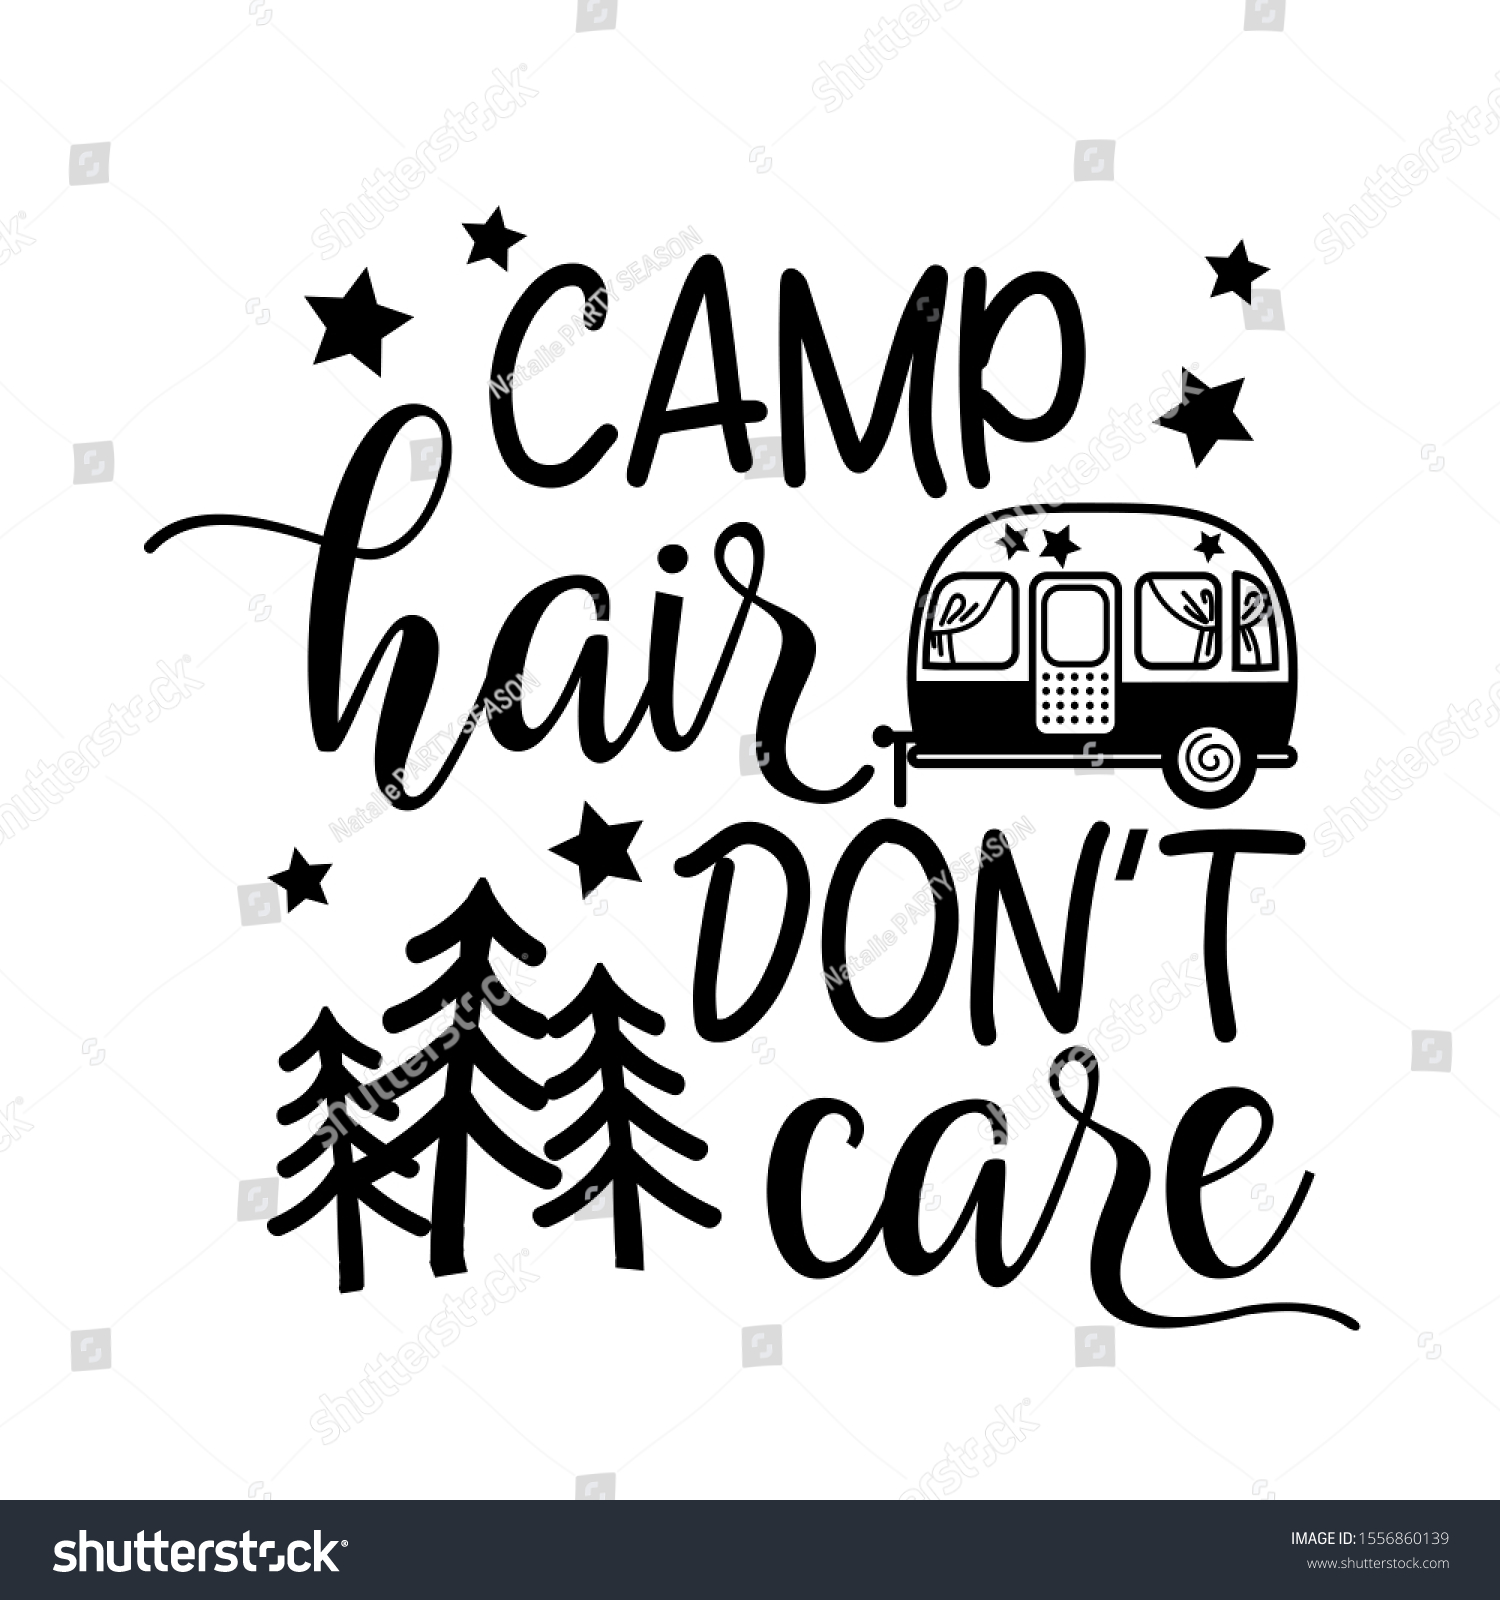 Camper Hair Dont Care Vector Files Stock Vector Royalty Free 1556860139